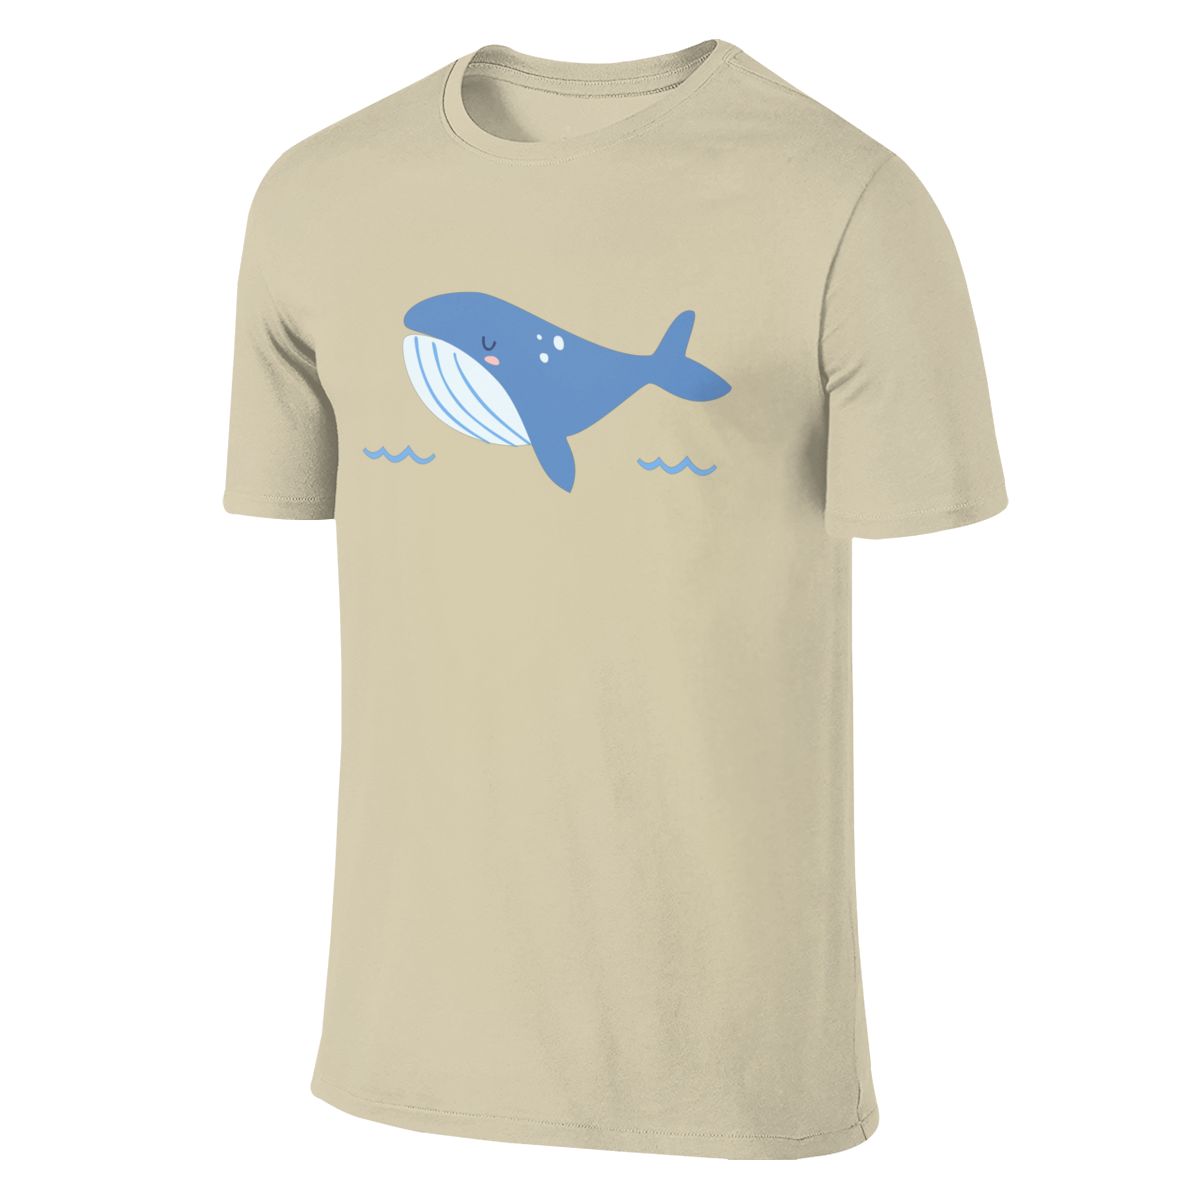 Baby Whale T-Shirt (Double sided graphic)